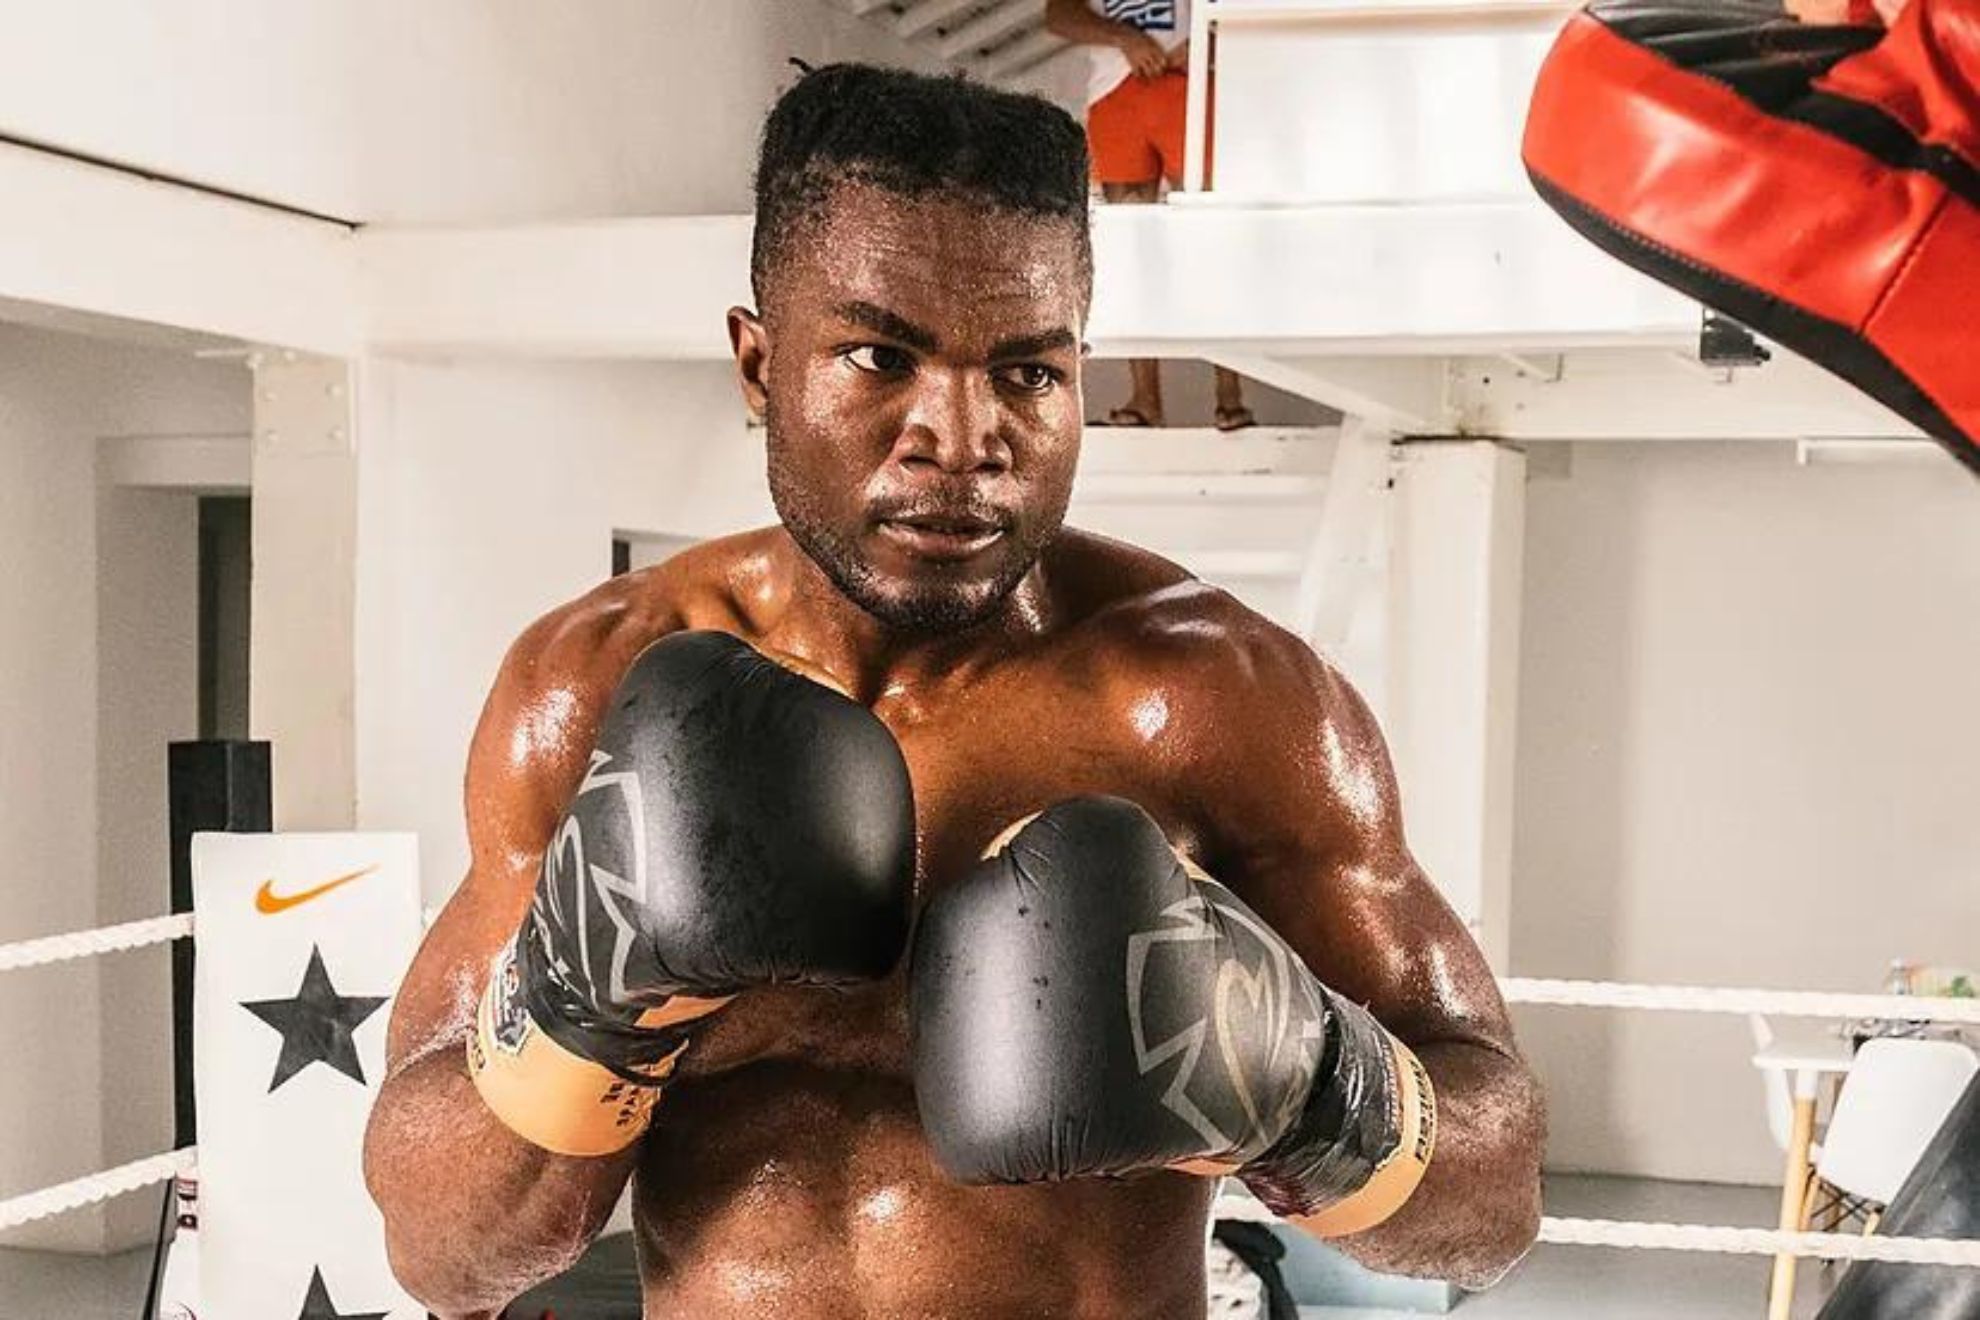 Congolese boxer Ardi Ndembo sadly passes away after weeks of being hospitalized